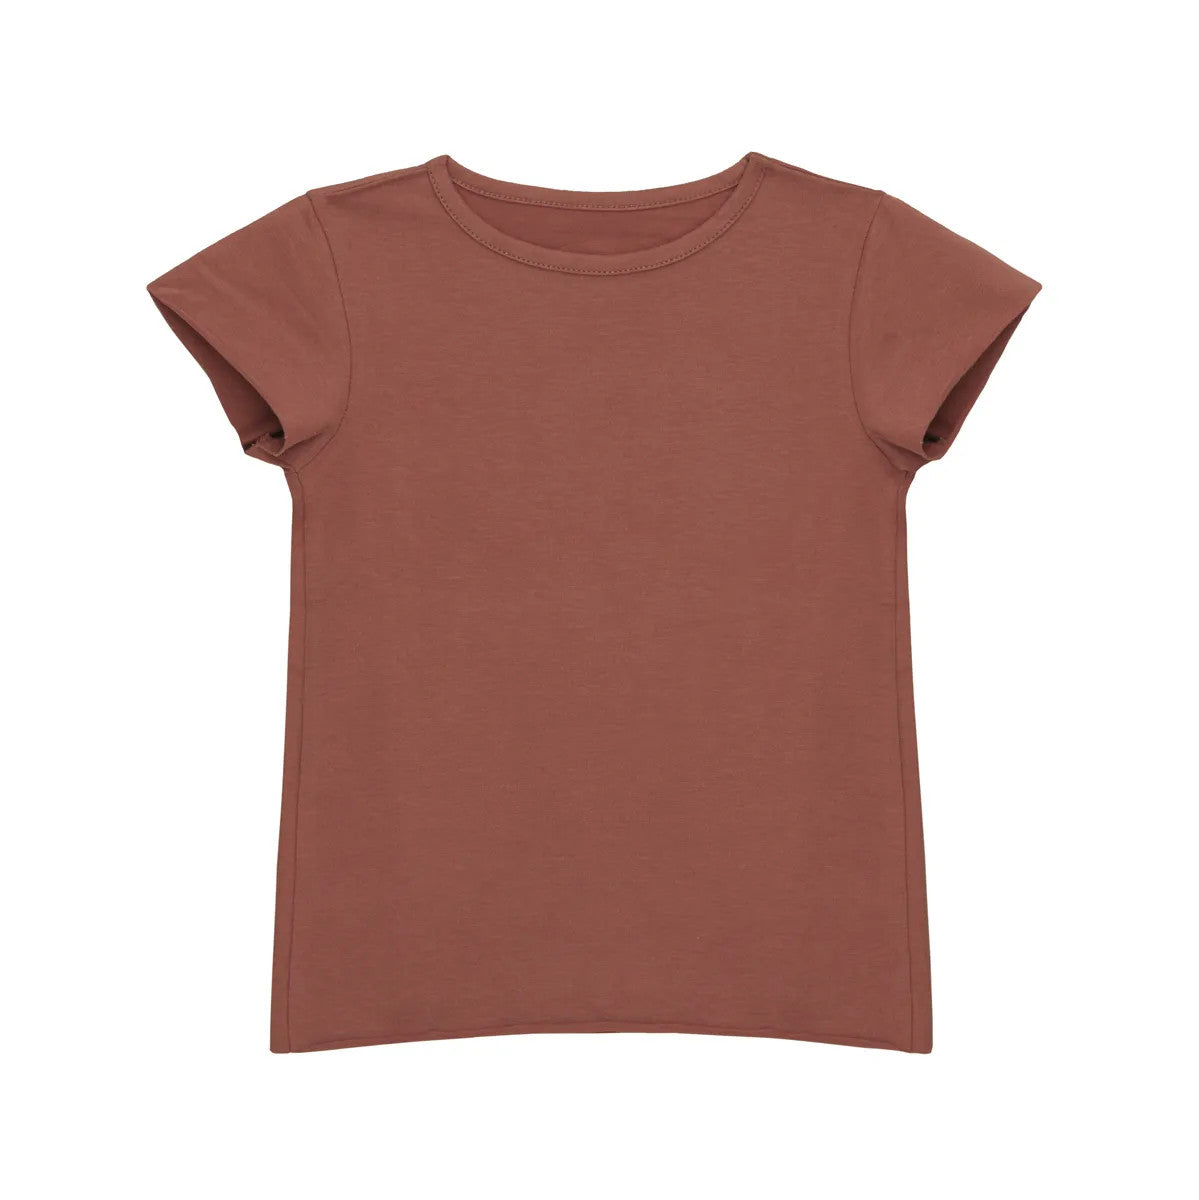 Little Hedonist unisex organic cotton t-shirt in Potters Clay